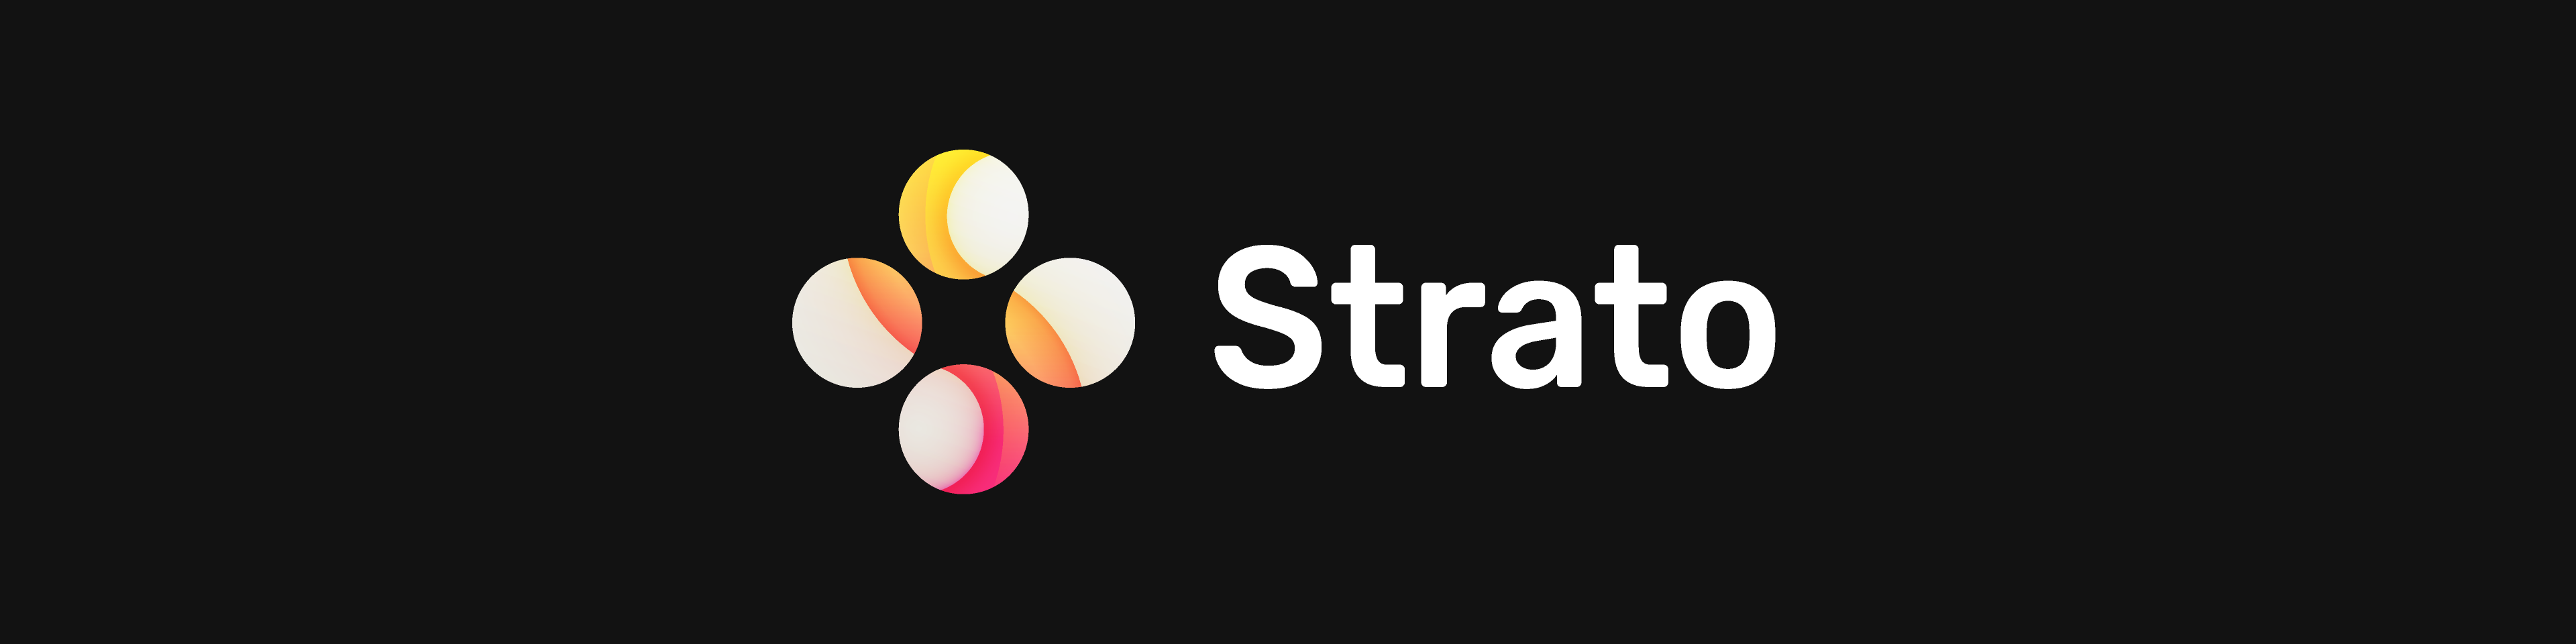 strato-banner-4-1.png